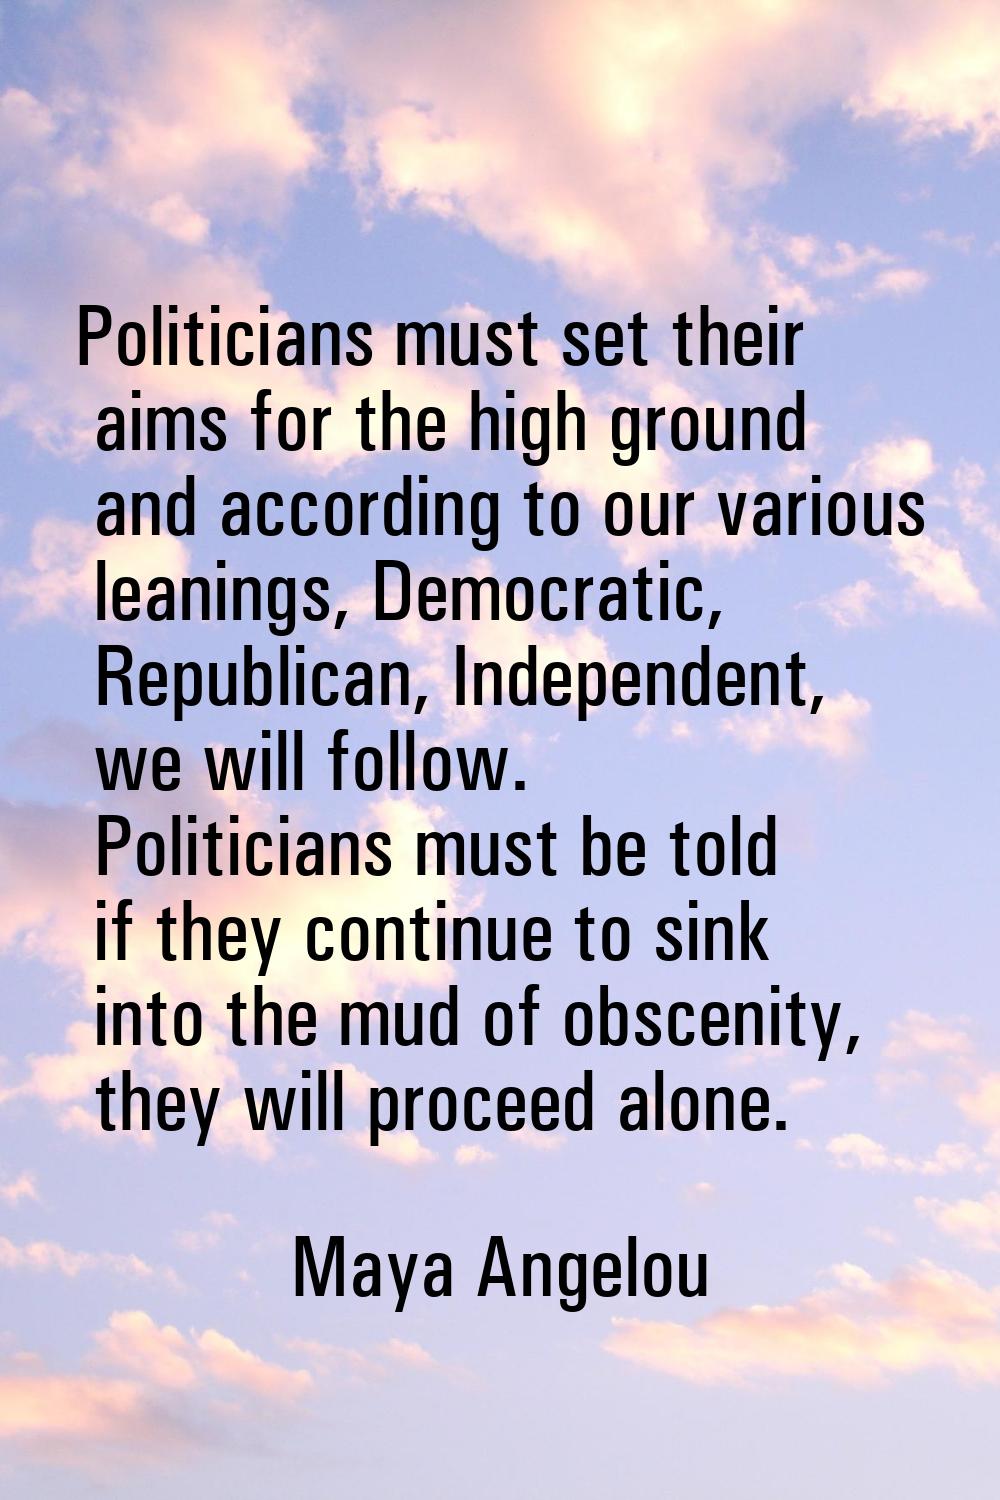 Politicians must set their aims for the high ground and according to our various leanings, Democrat